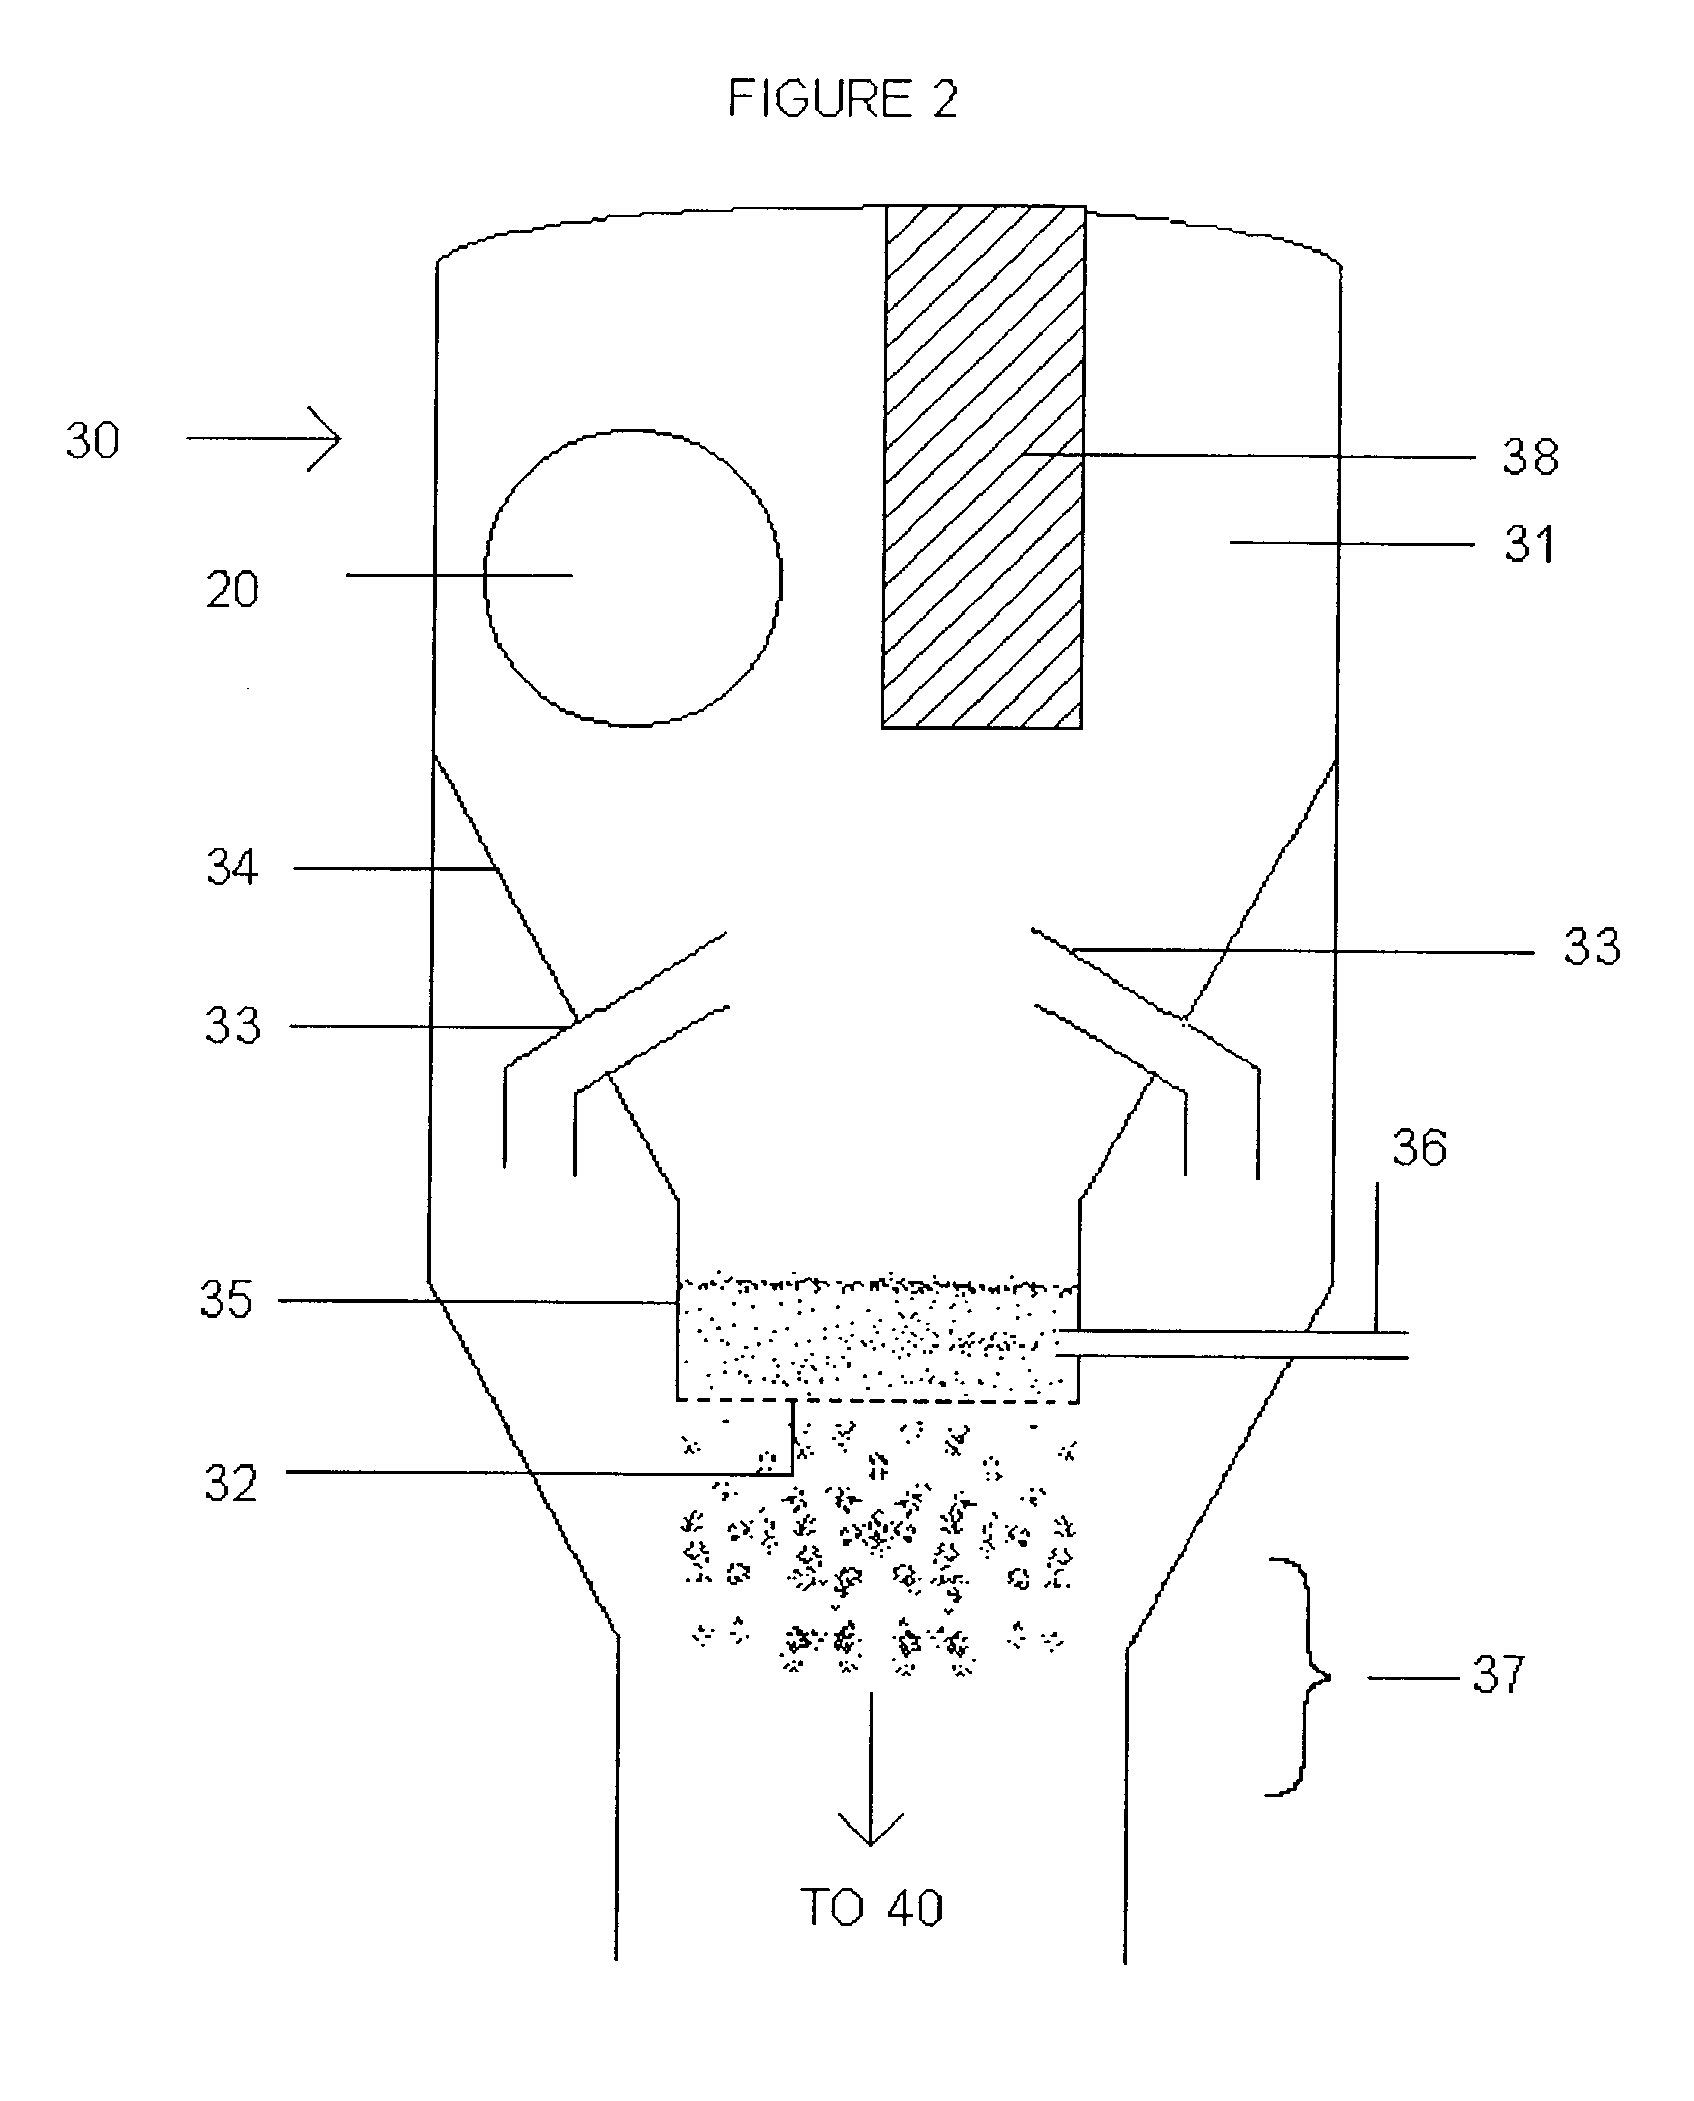 Apparatus and process for downflow fluid catalytic cracking